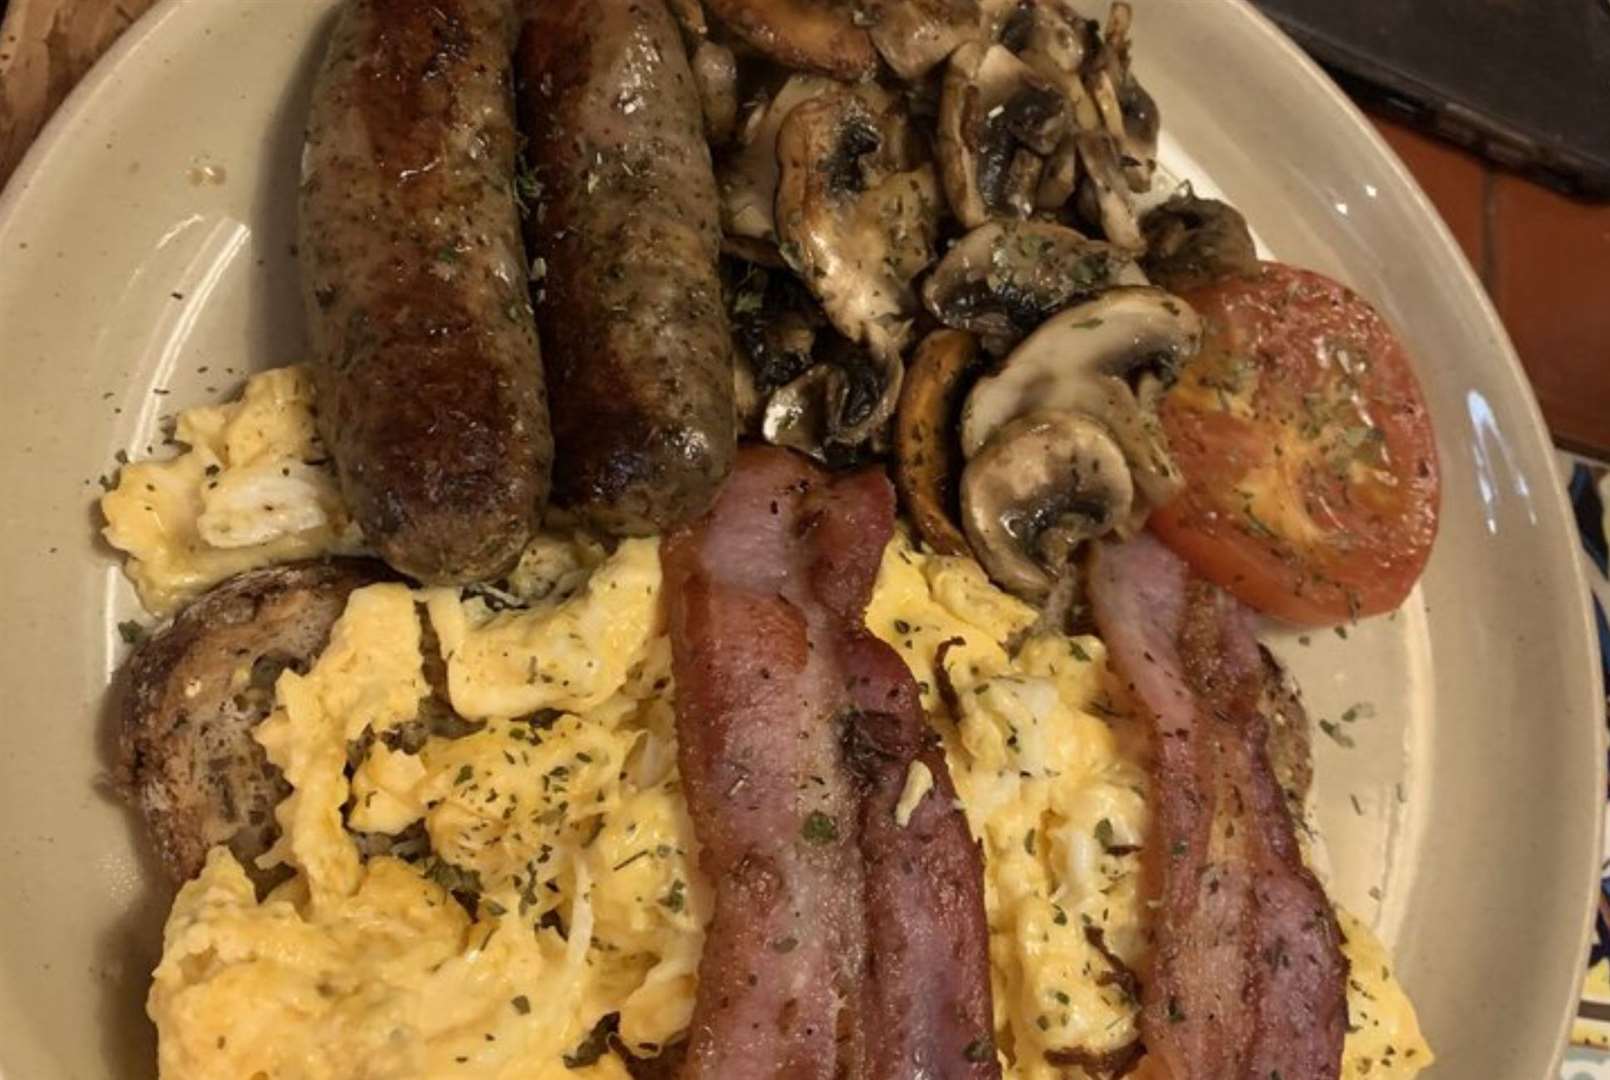 The Sopranos fry-up breakfast features bacon, eggs, sausages, mushrooms and tomato. Picture: Sopranos